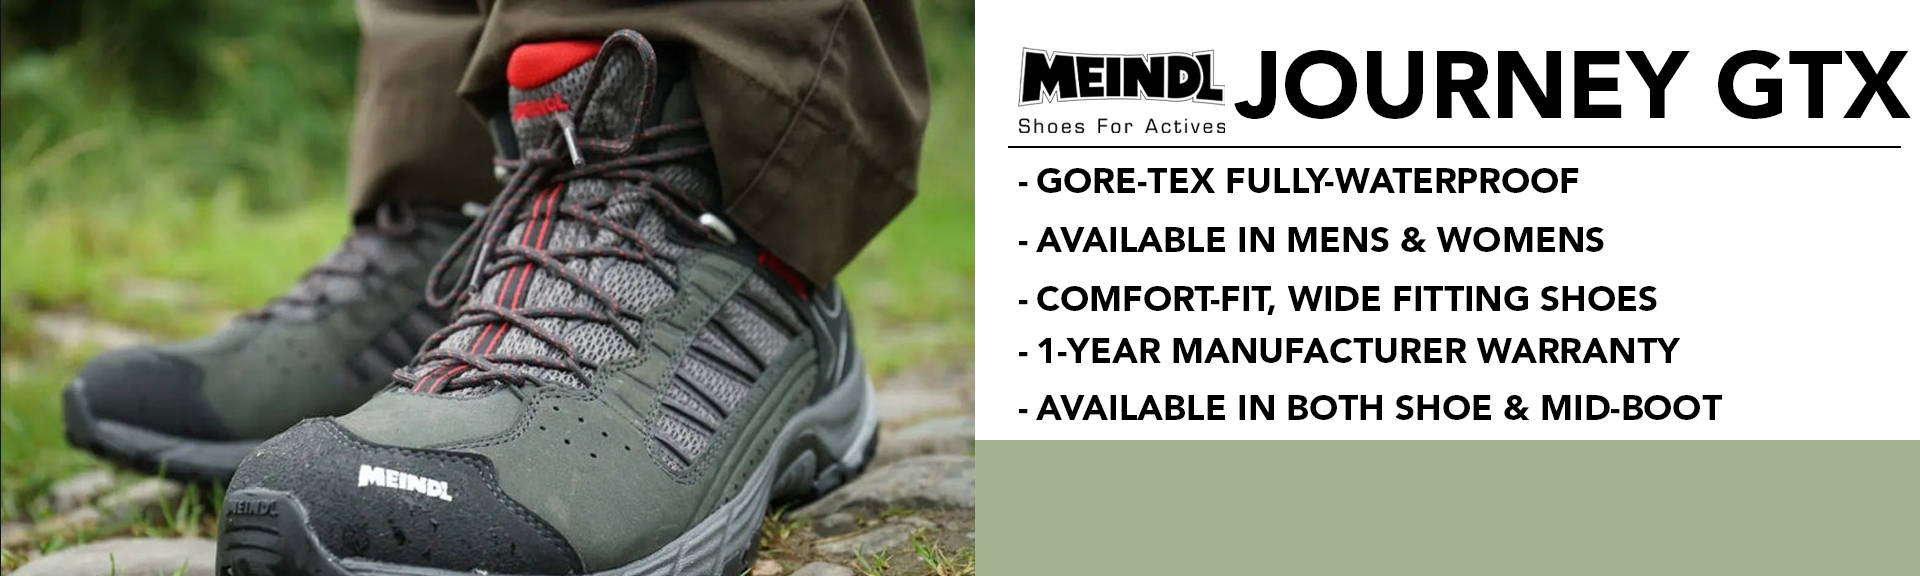 Meindl Journey GTX wide-fitting shoes & botos for men & women.